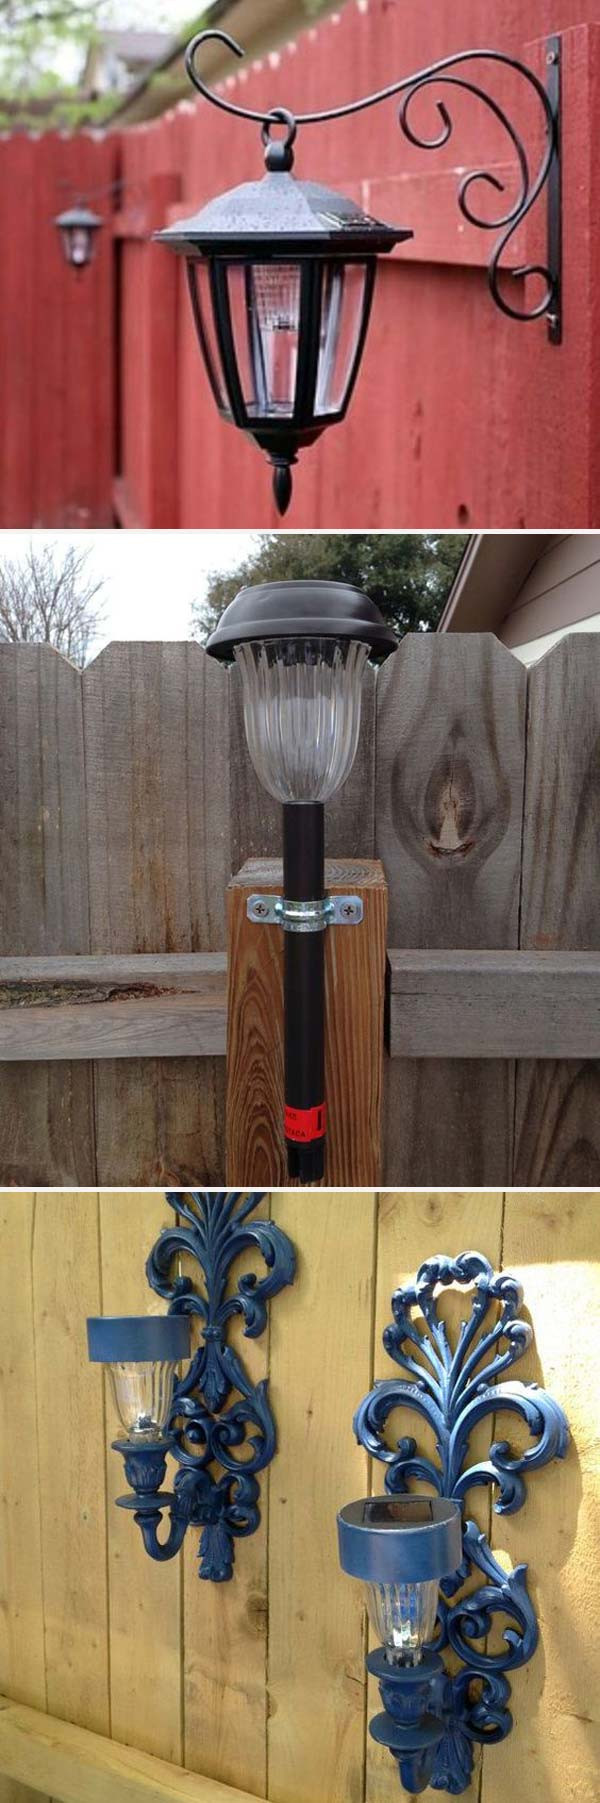 DIY Outdoor Lighting
 20 Cool and Easy DIY Ideas to Display Your Solar Lighting